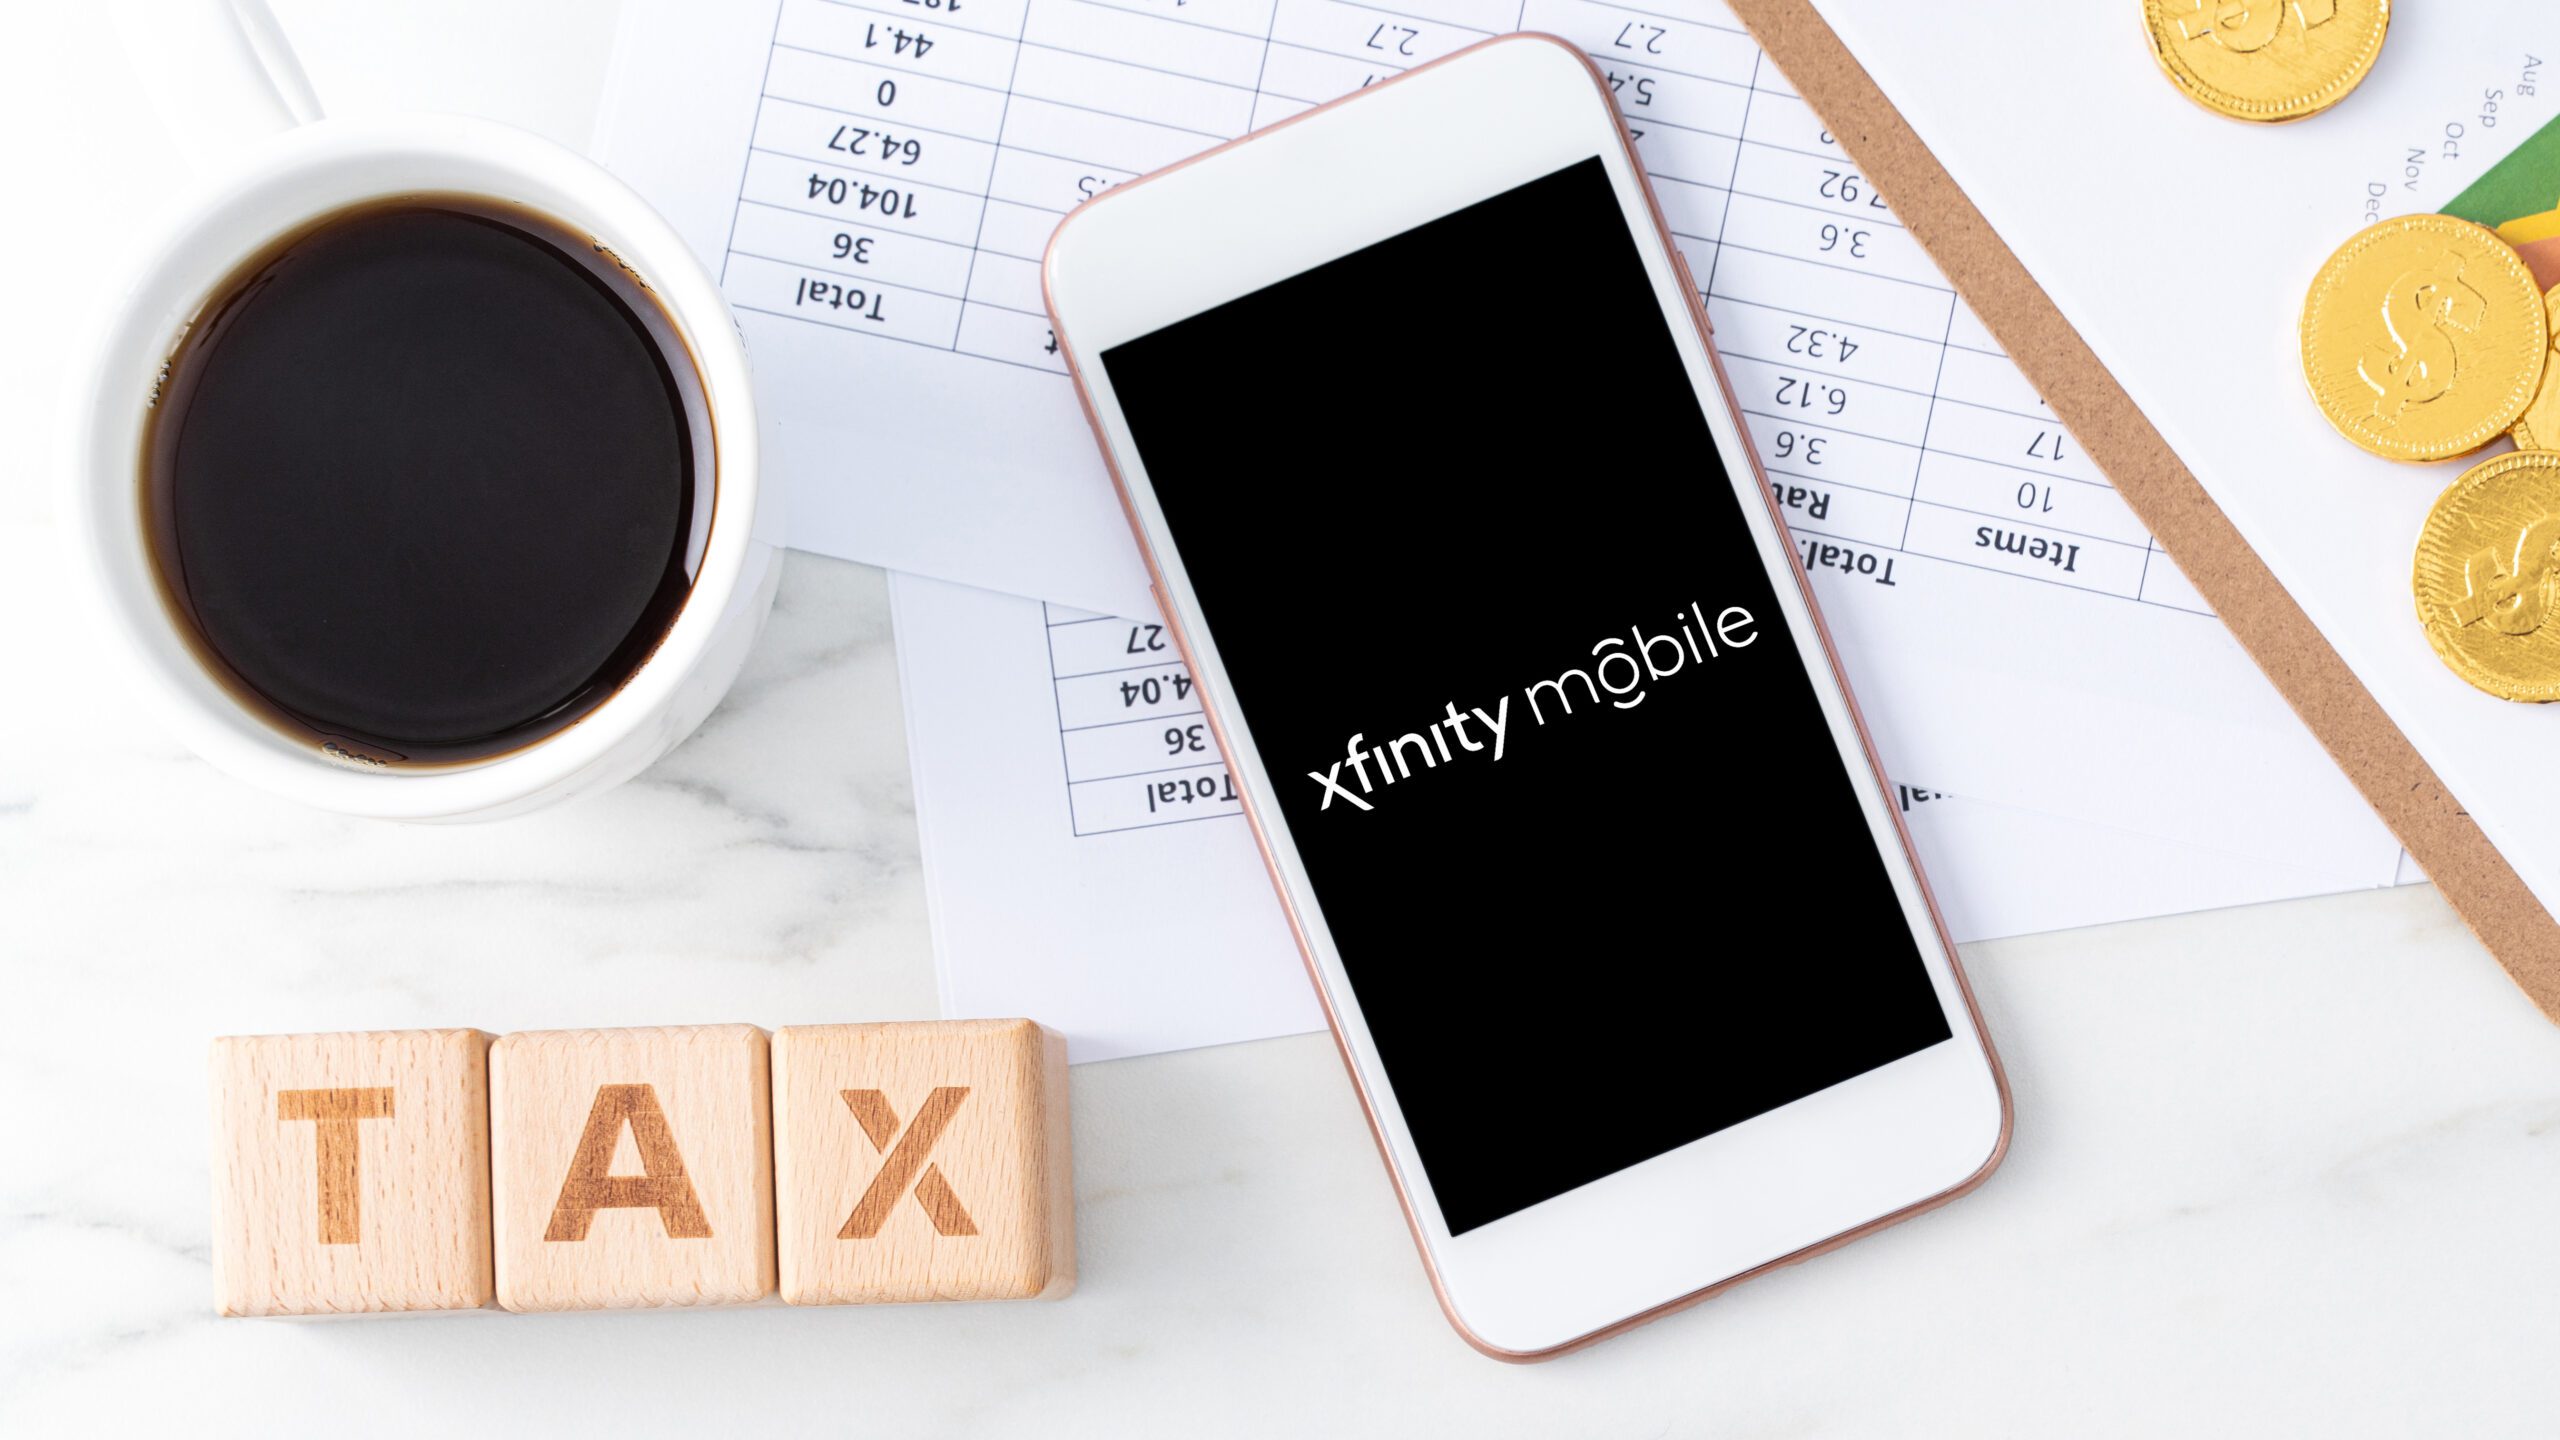 Tax Returns are Here Just in Time for New Xfinity Mobile Offers for